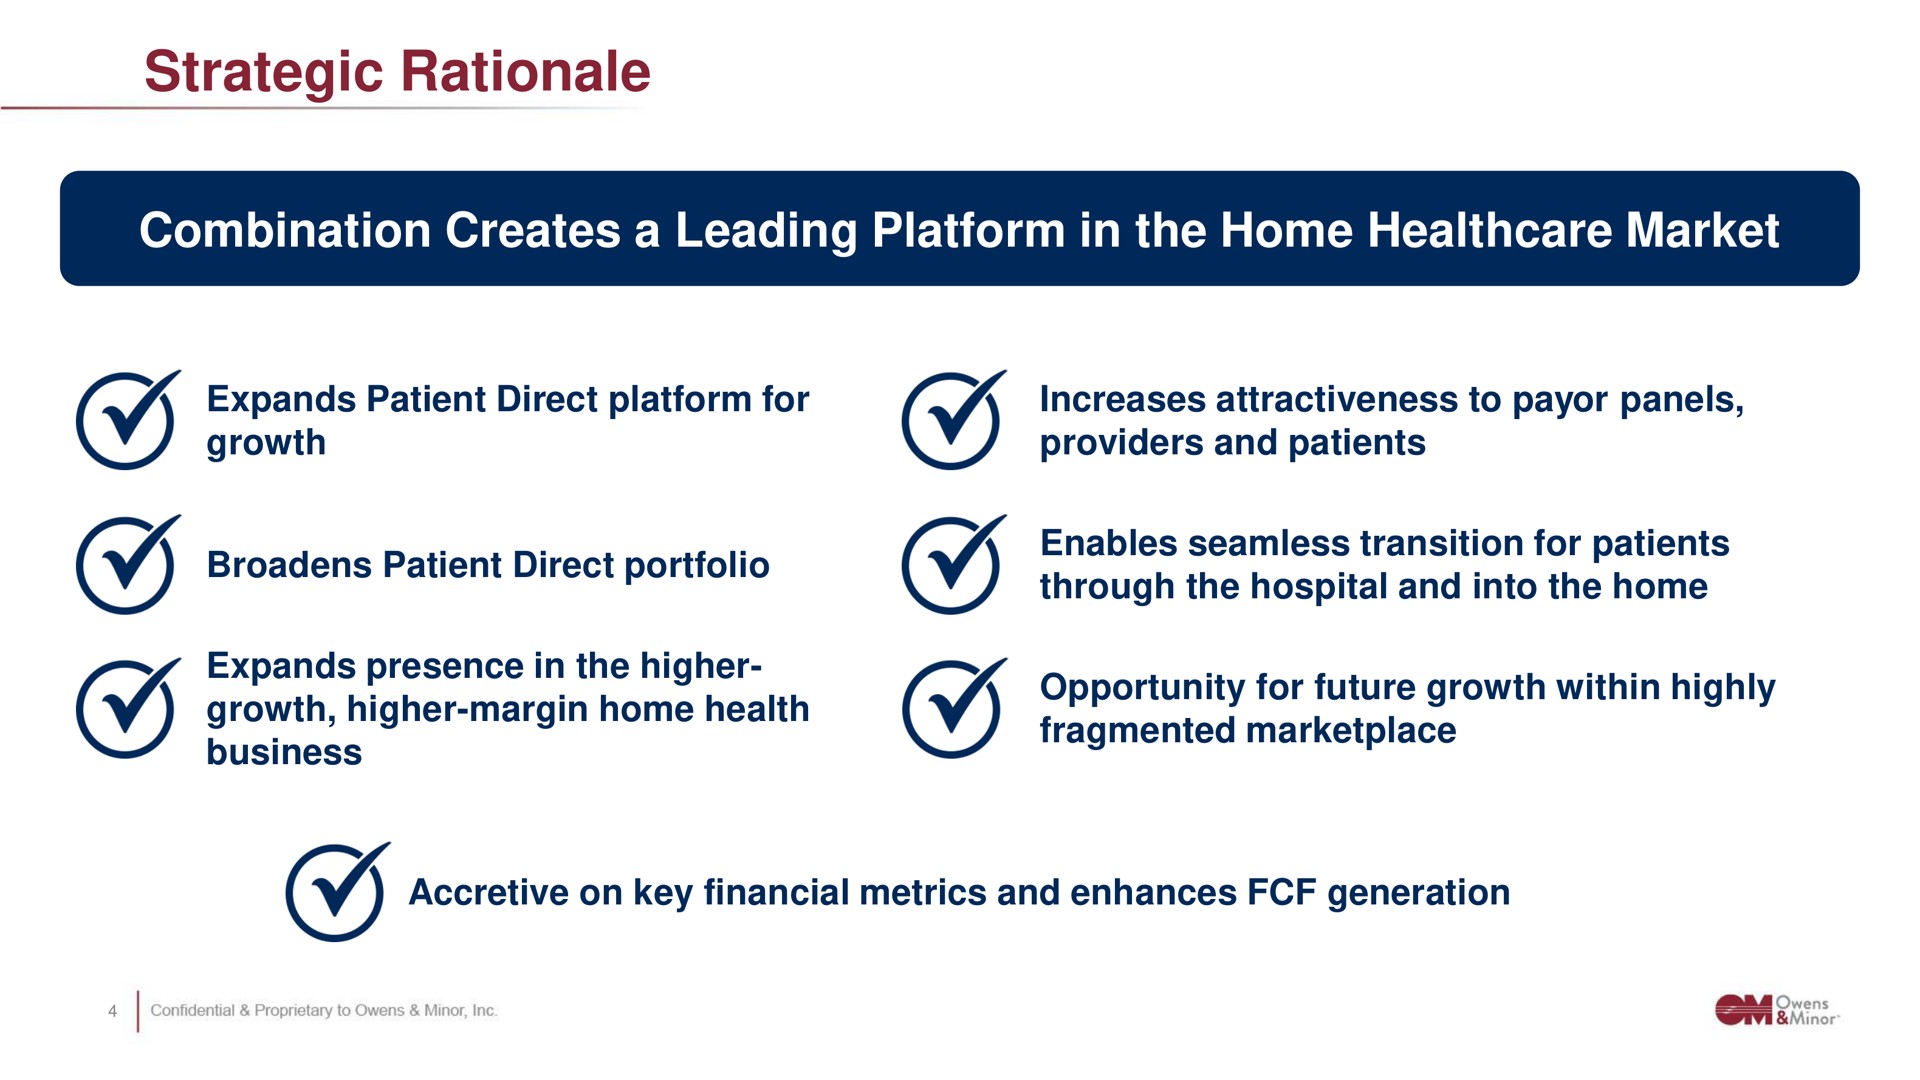 strategic rationale combination creates a leading platform in the home market | Owens&Minor